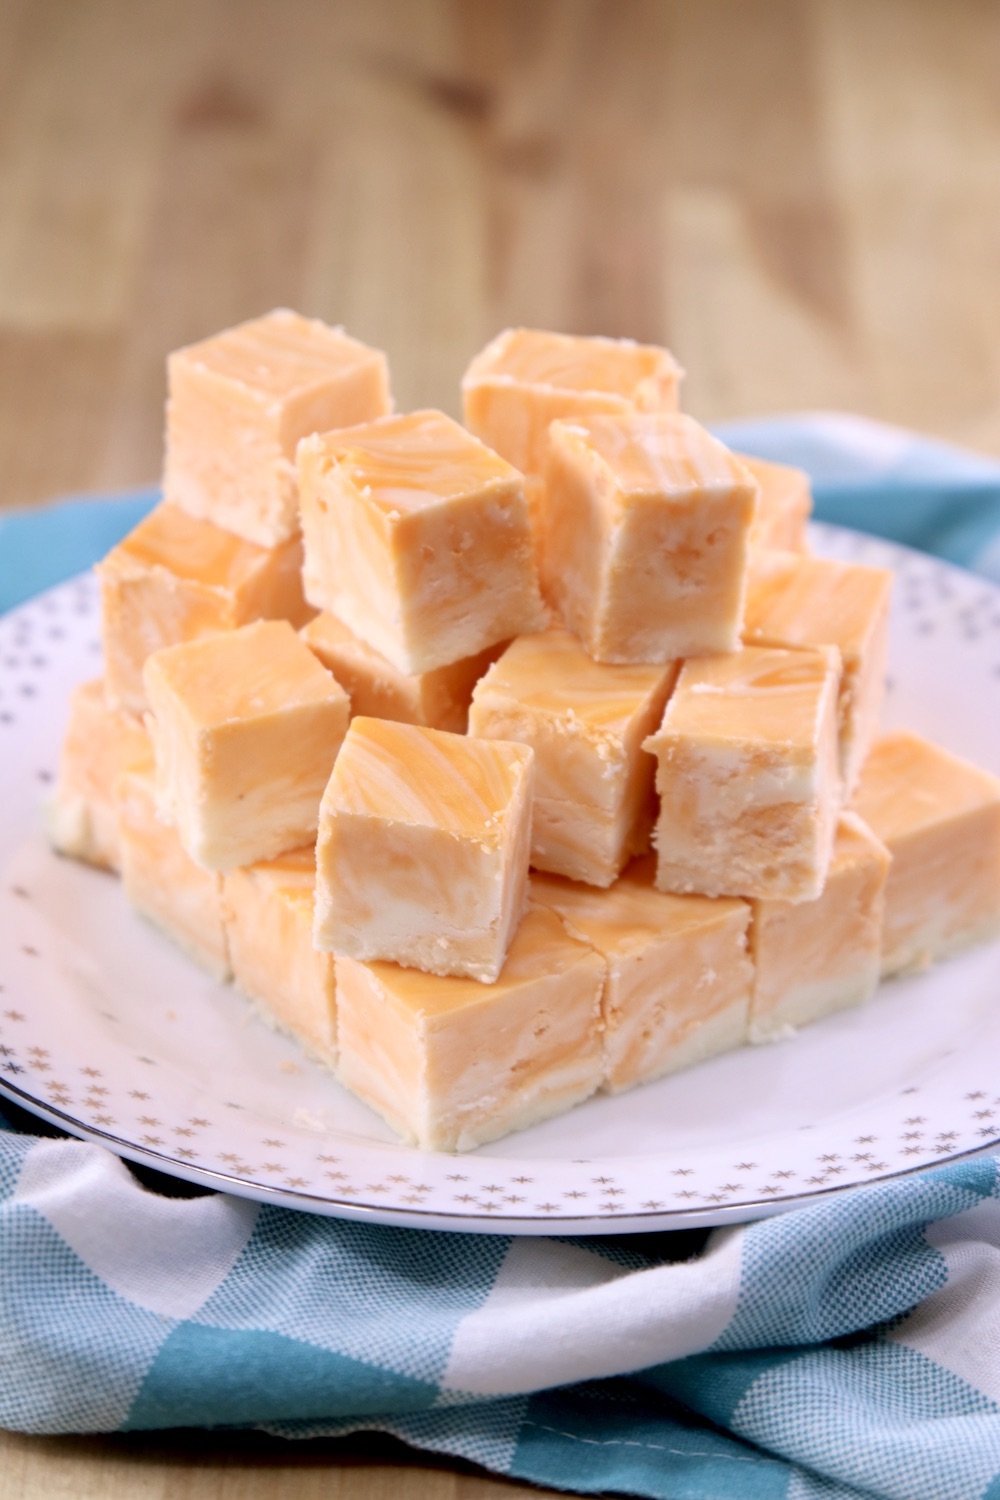 Squares of orange cream marble fudge stacked on a plate with blue and white check napkin